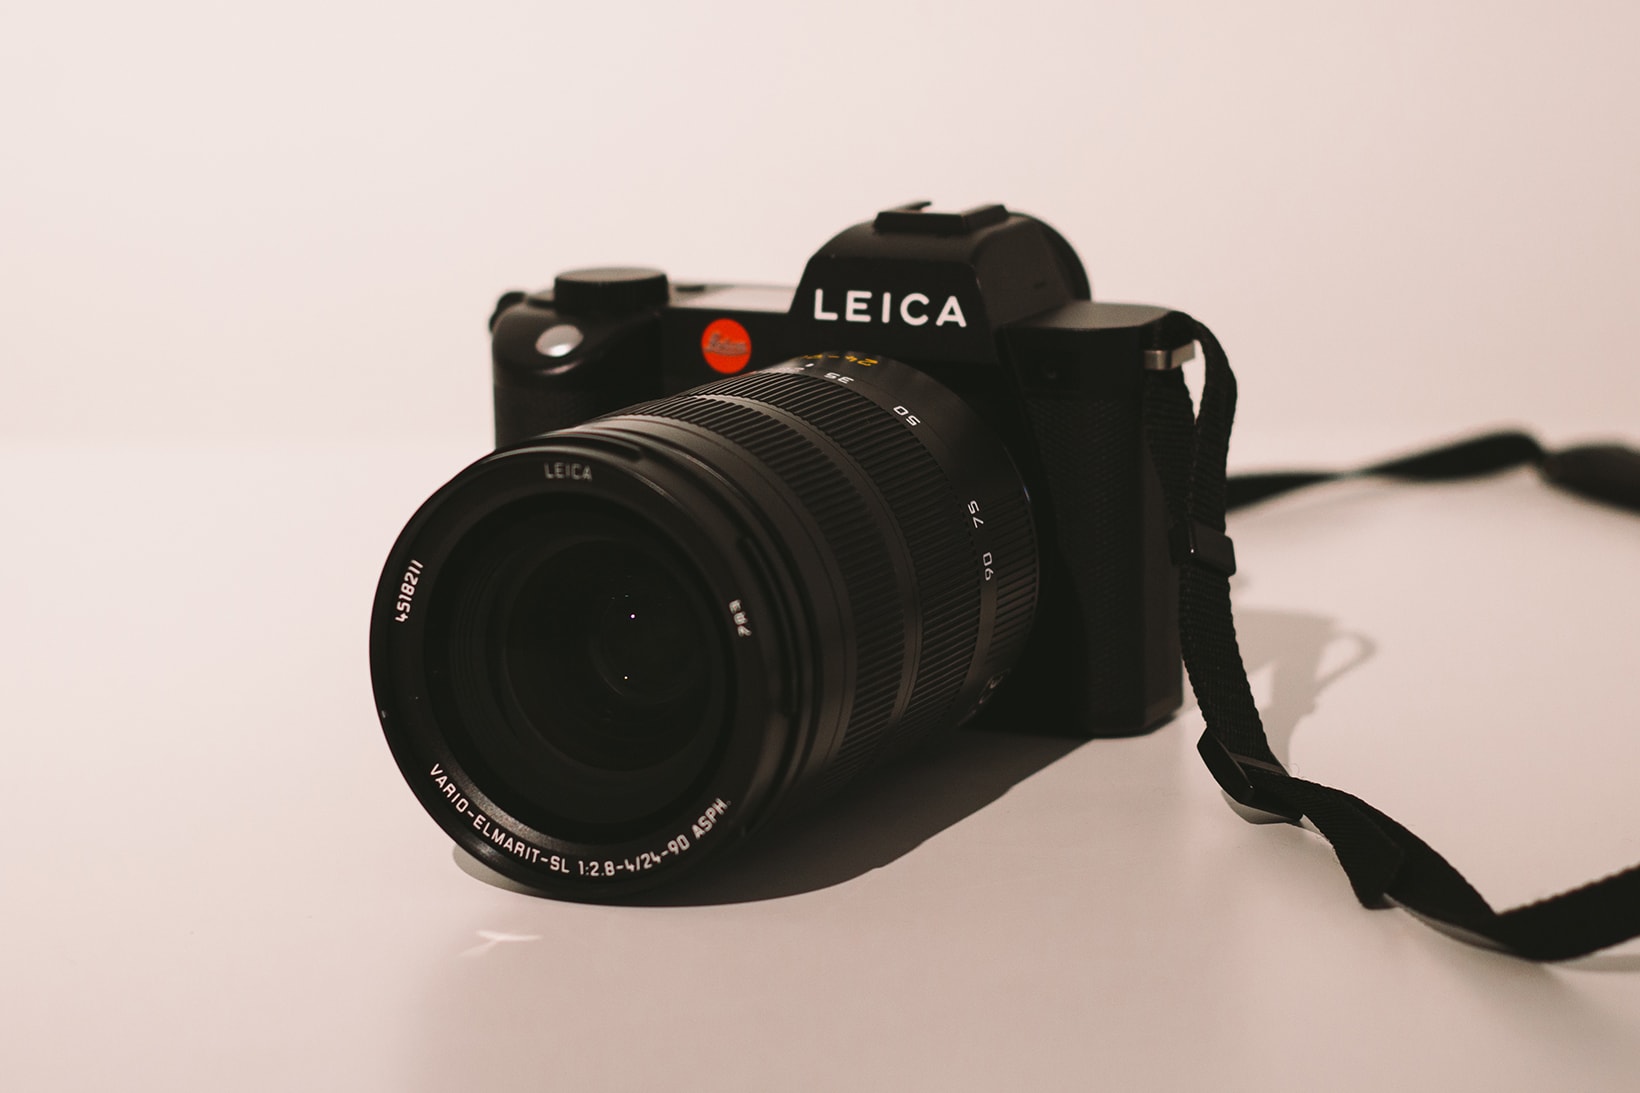 leica sl2 camera photography specs price tech nike air max sneakers black white